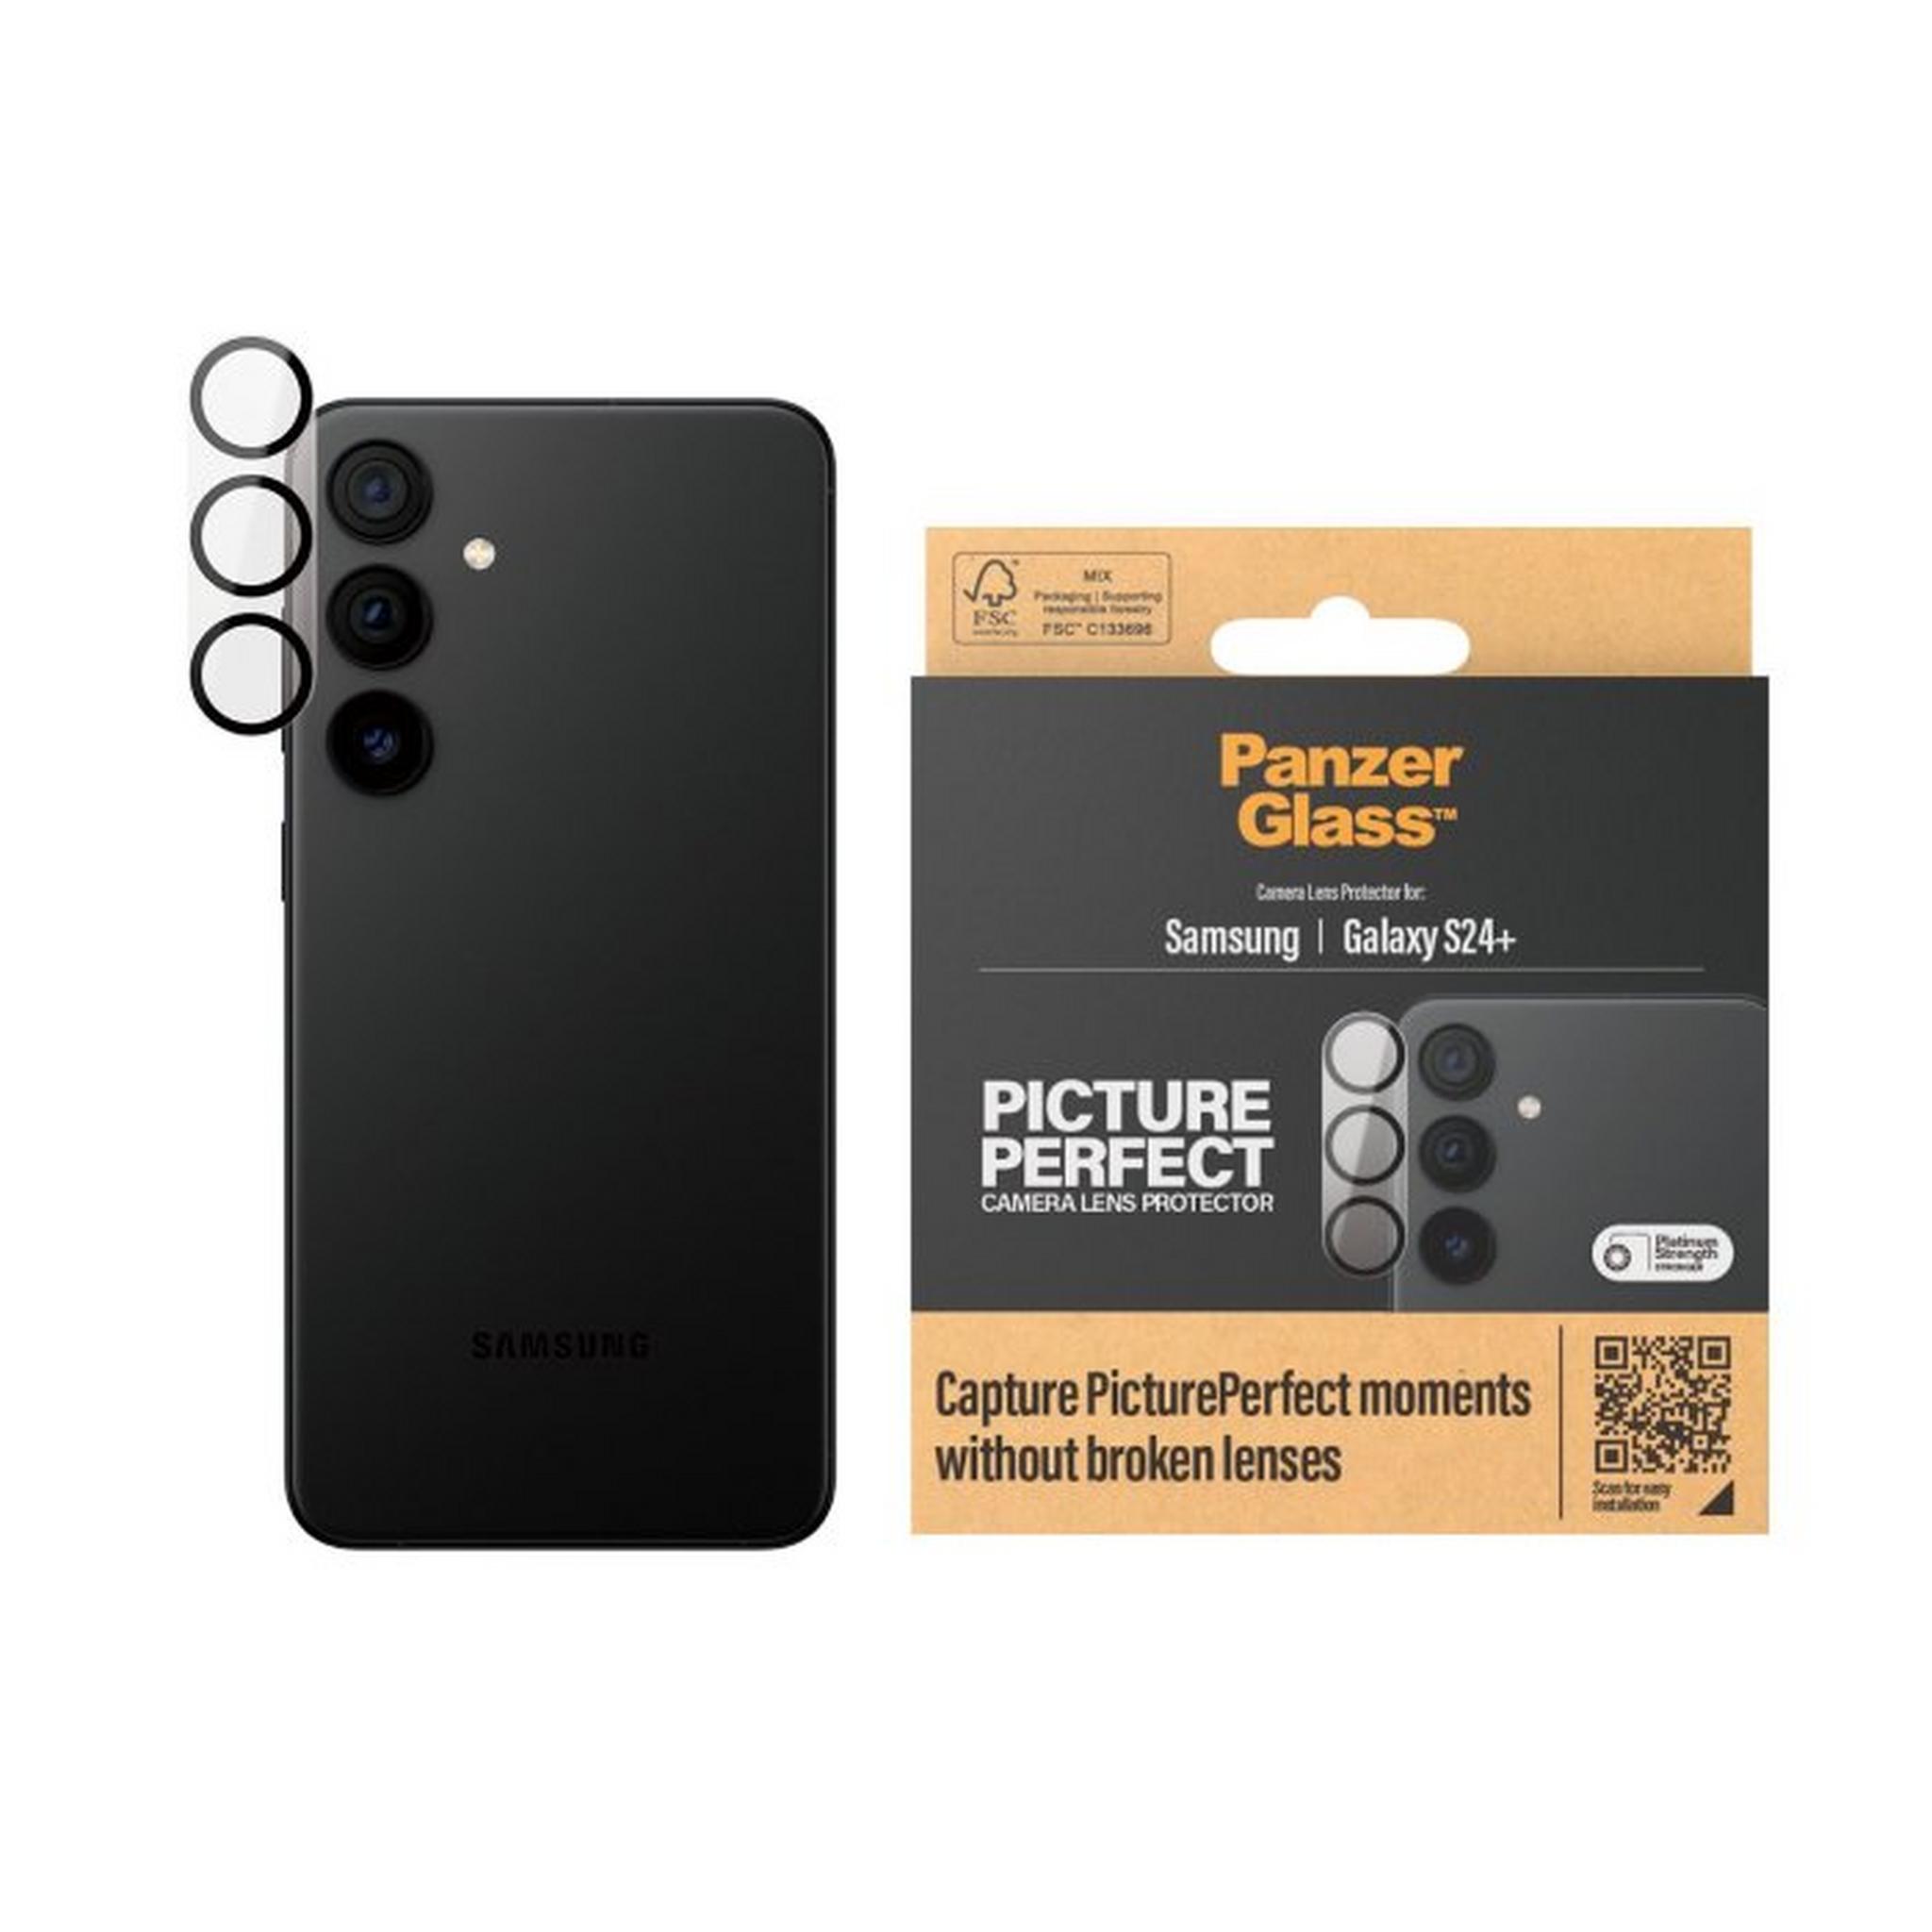 PANZER Glass Picture perfect Camera Lens Protector for Samsung Galaxy S24 Plus, 1205